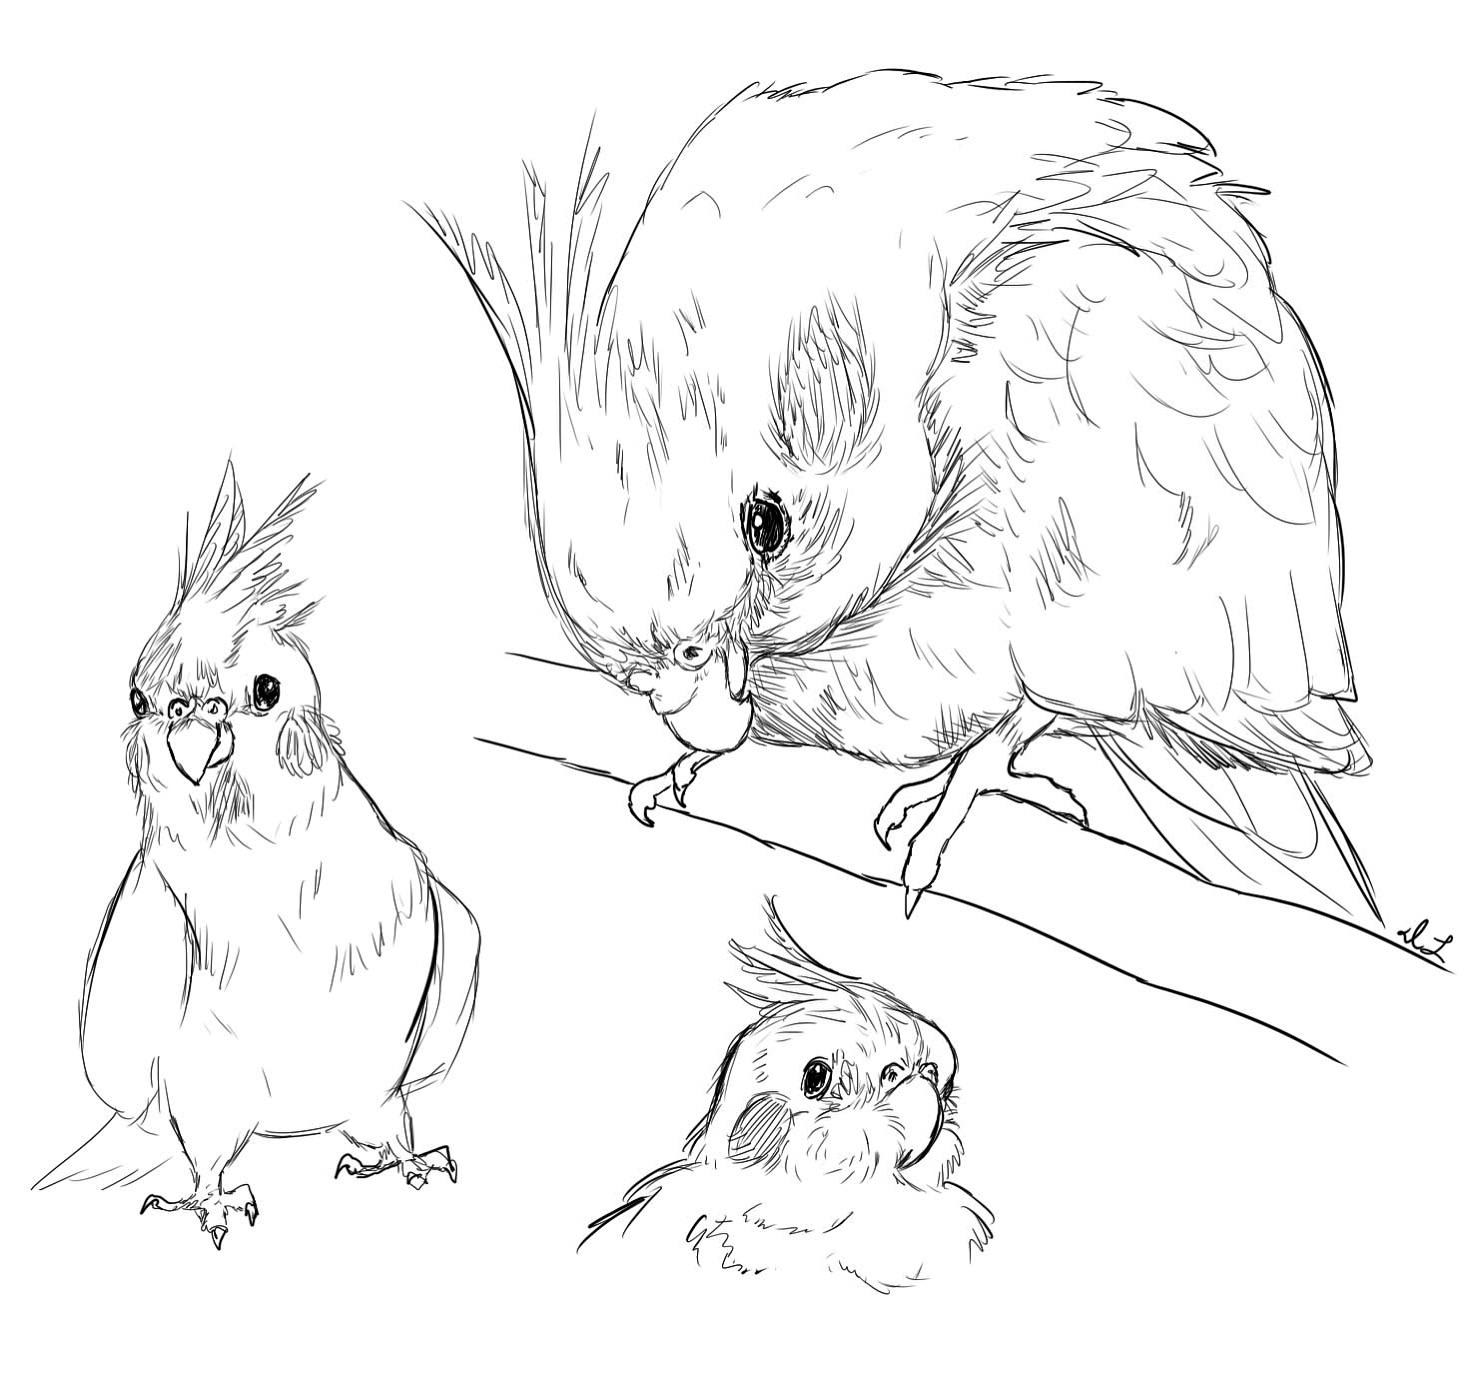 Chunky cockatiels by me